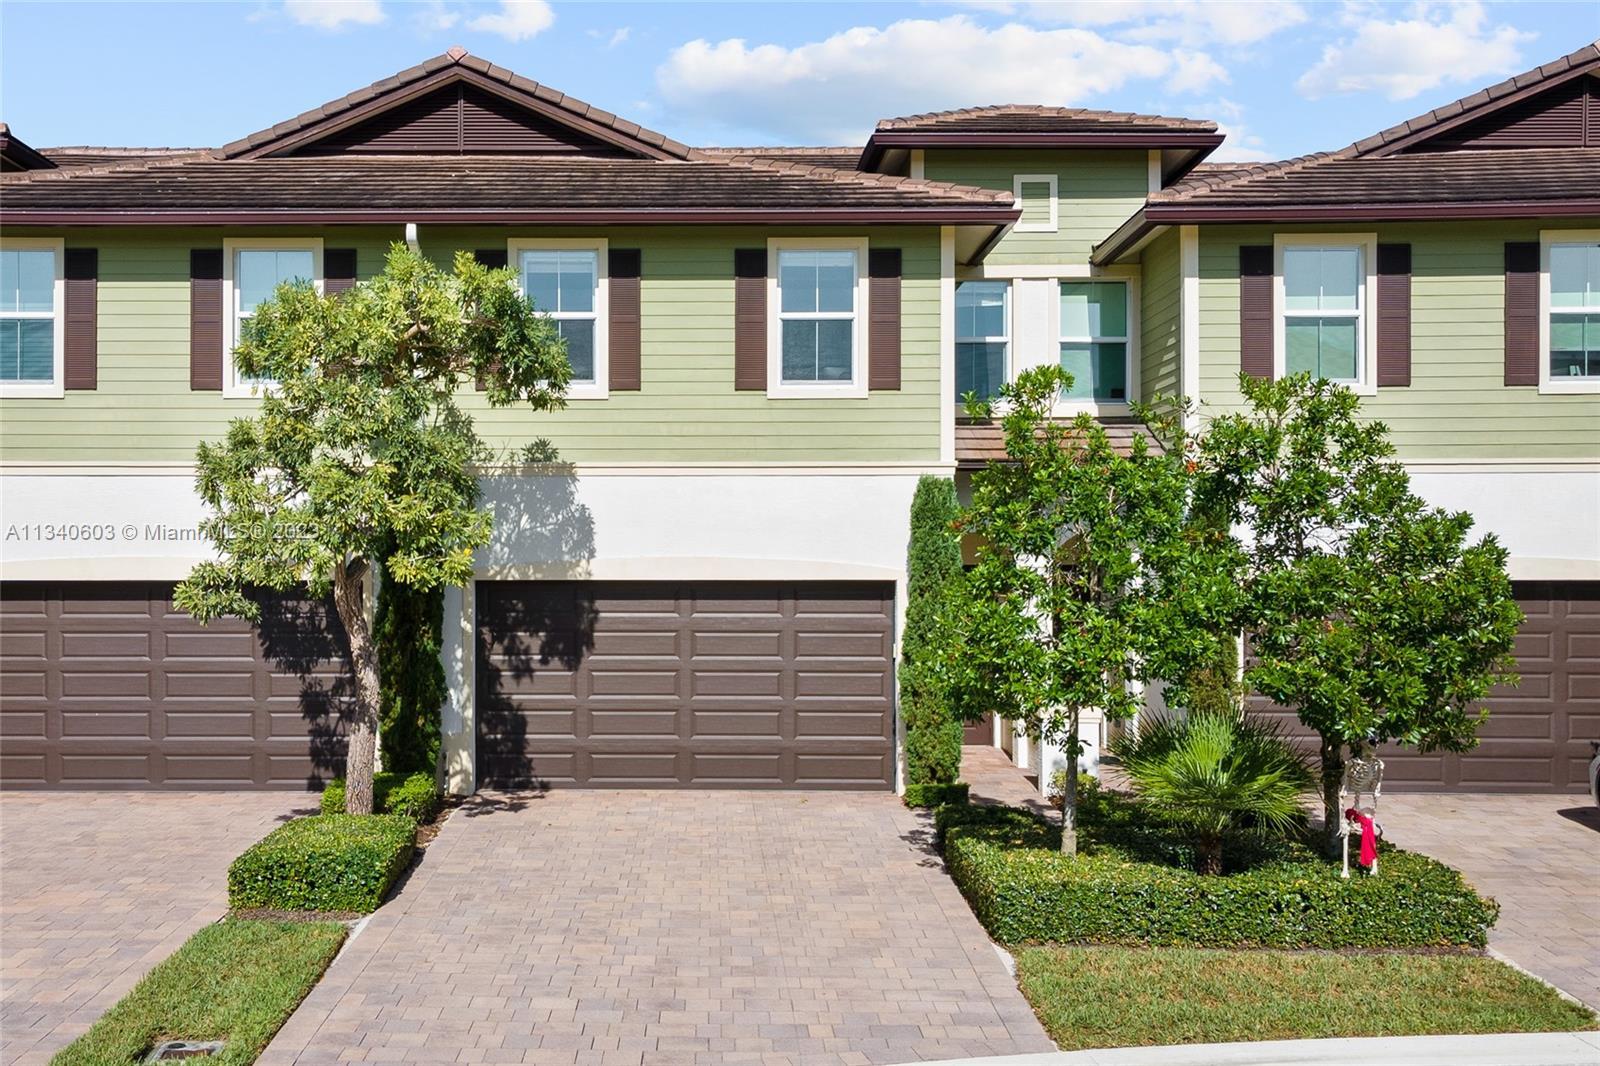 Beautifully decorated home with superior finishes in Pointe 100 - Boca Pointe's most recently built 